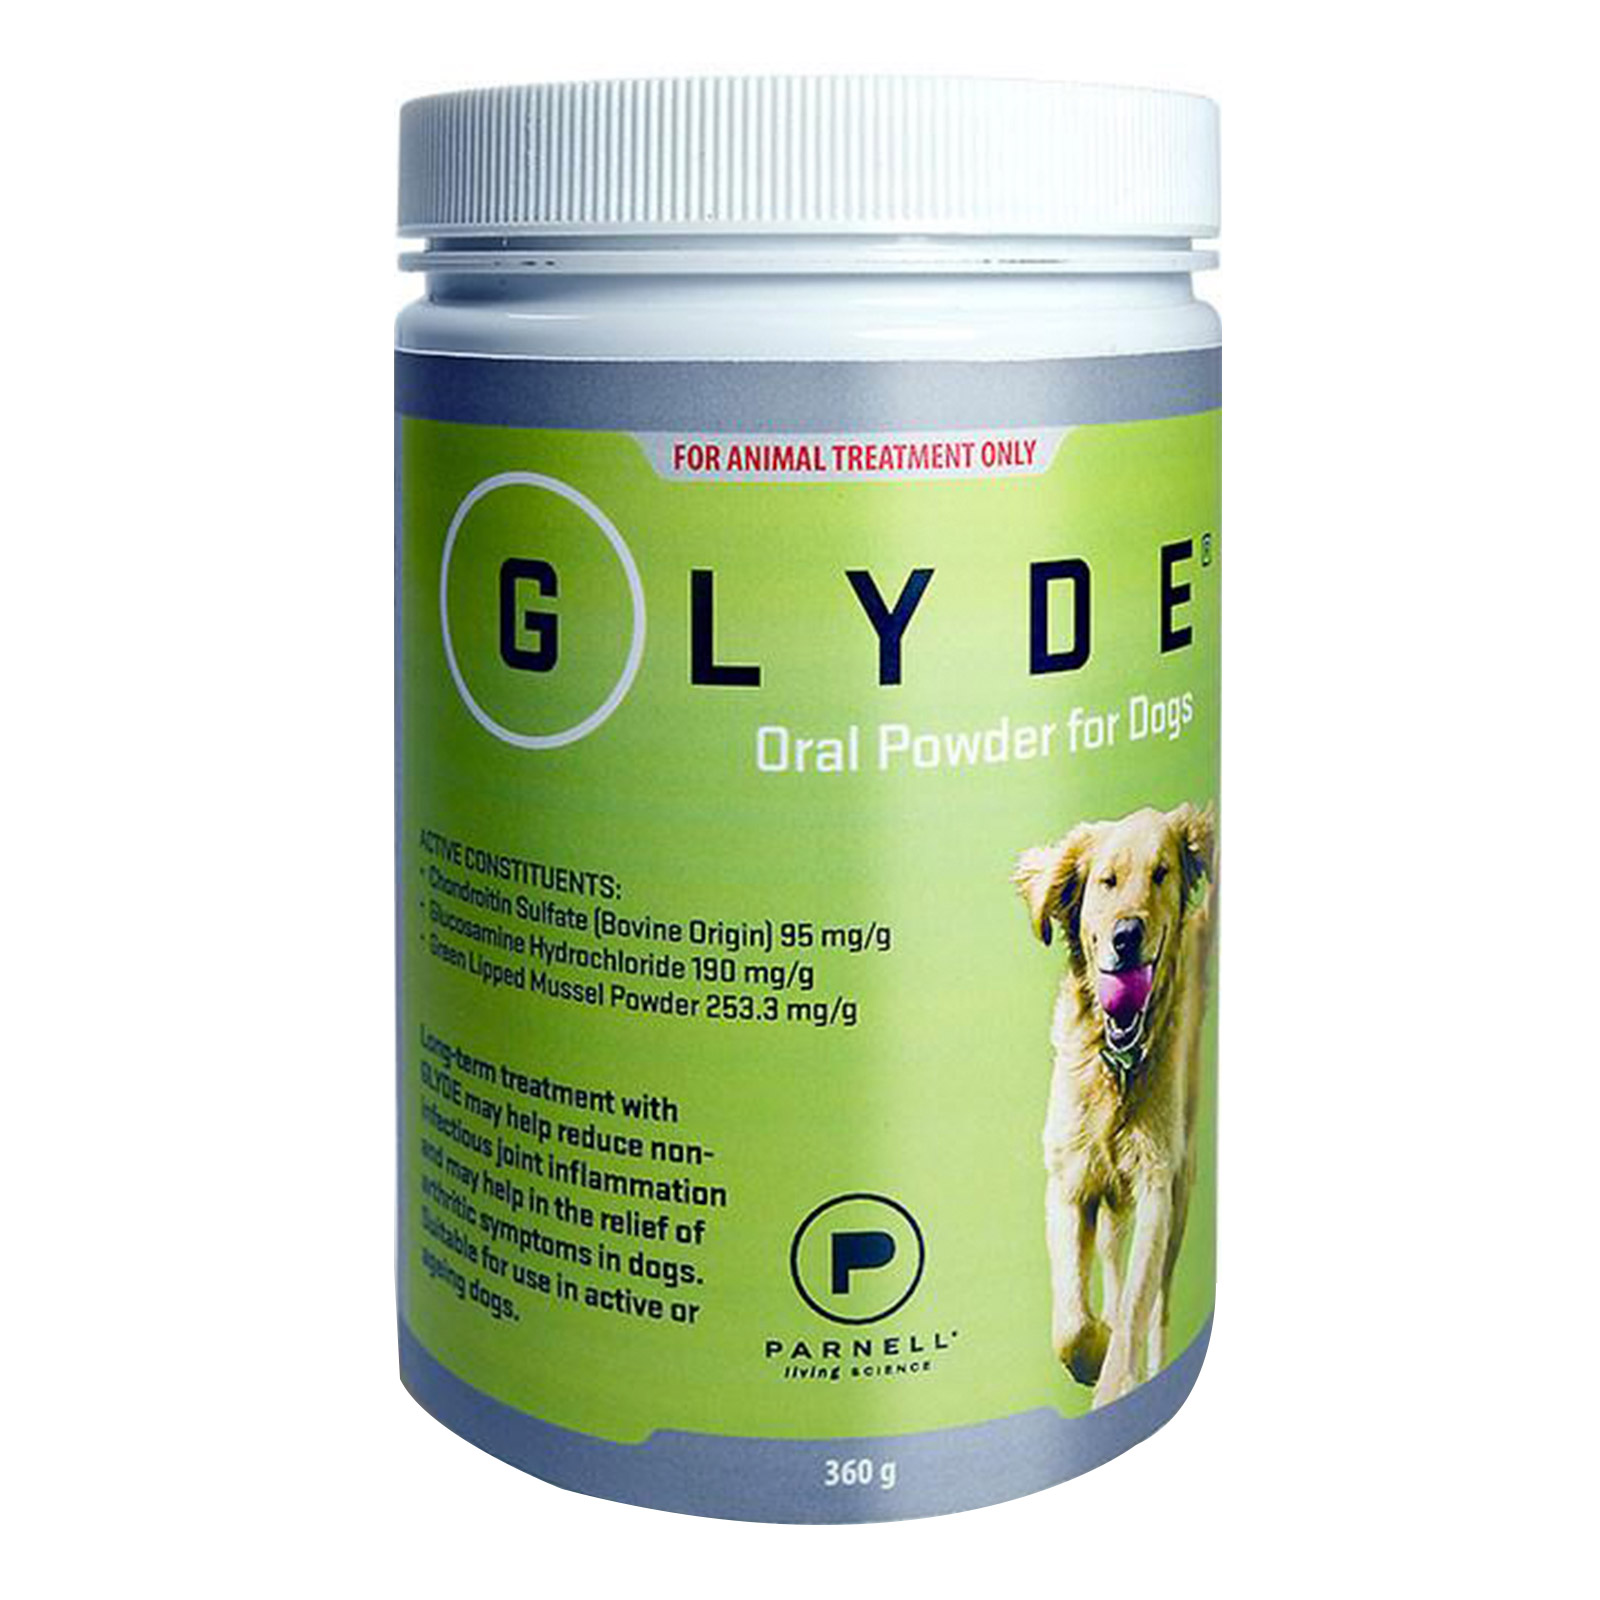 Glyde Oral Powder for Dog for Dogs